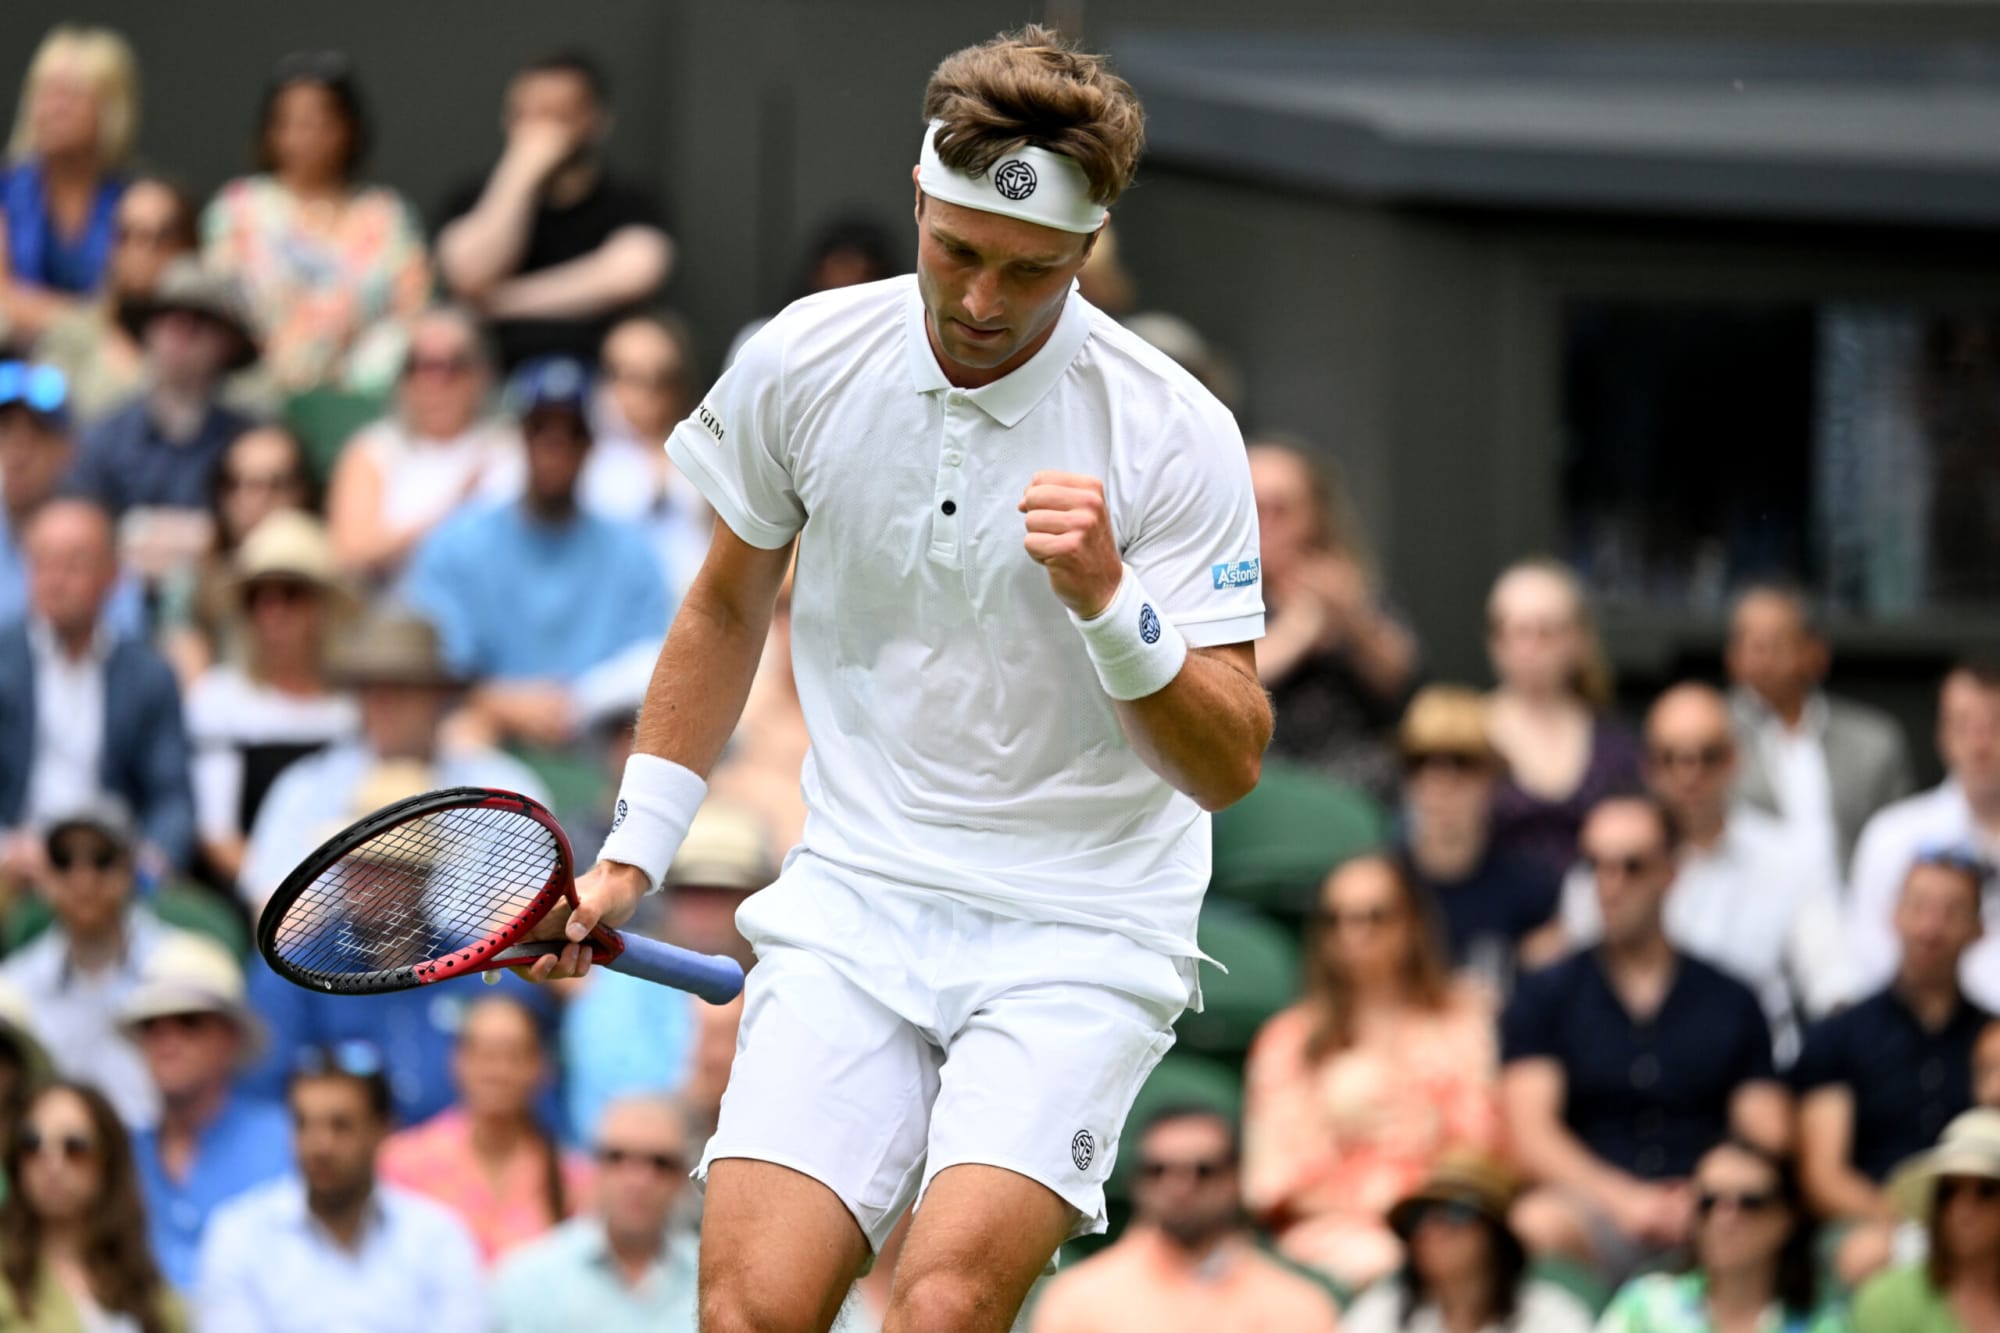 Wimbledon is done: What is up next on your tennis schedule - BVM Sports